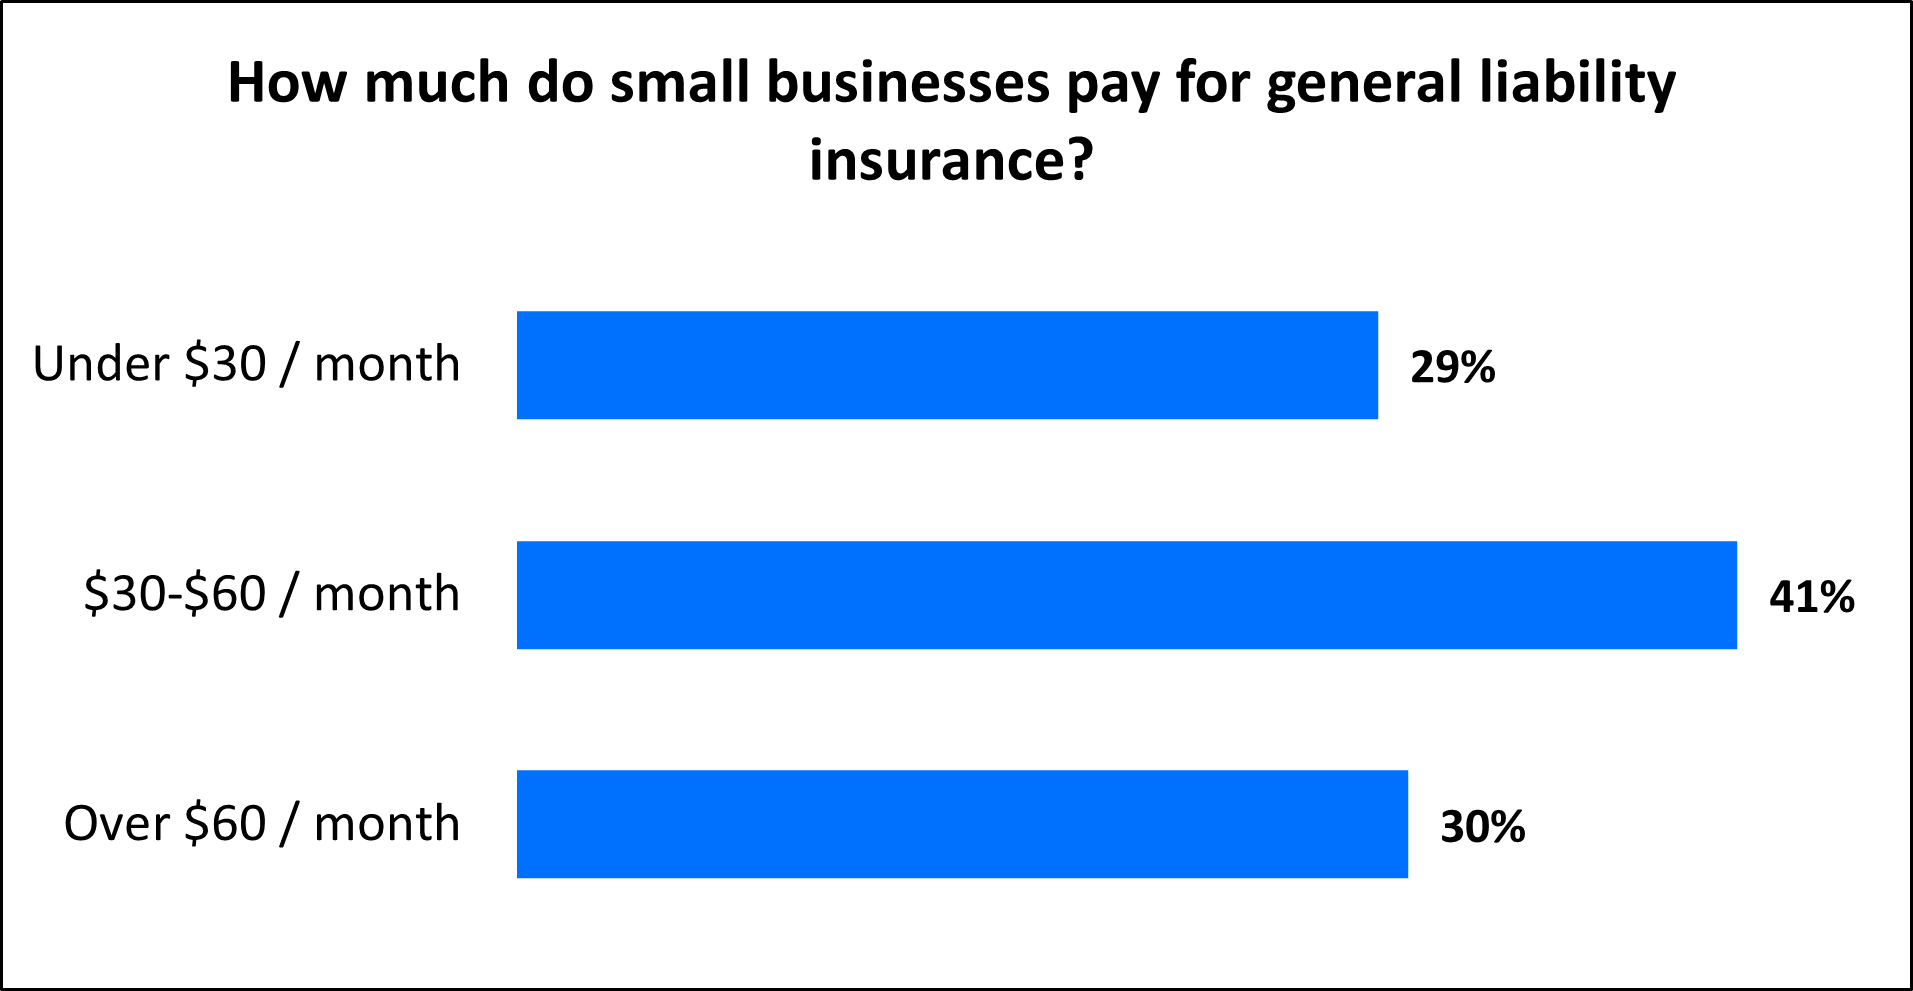 How much do small businesses pay for general liability insurance?